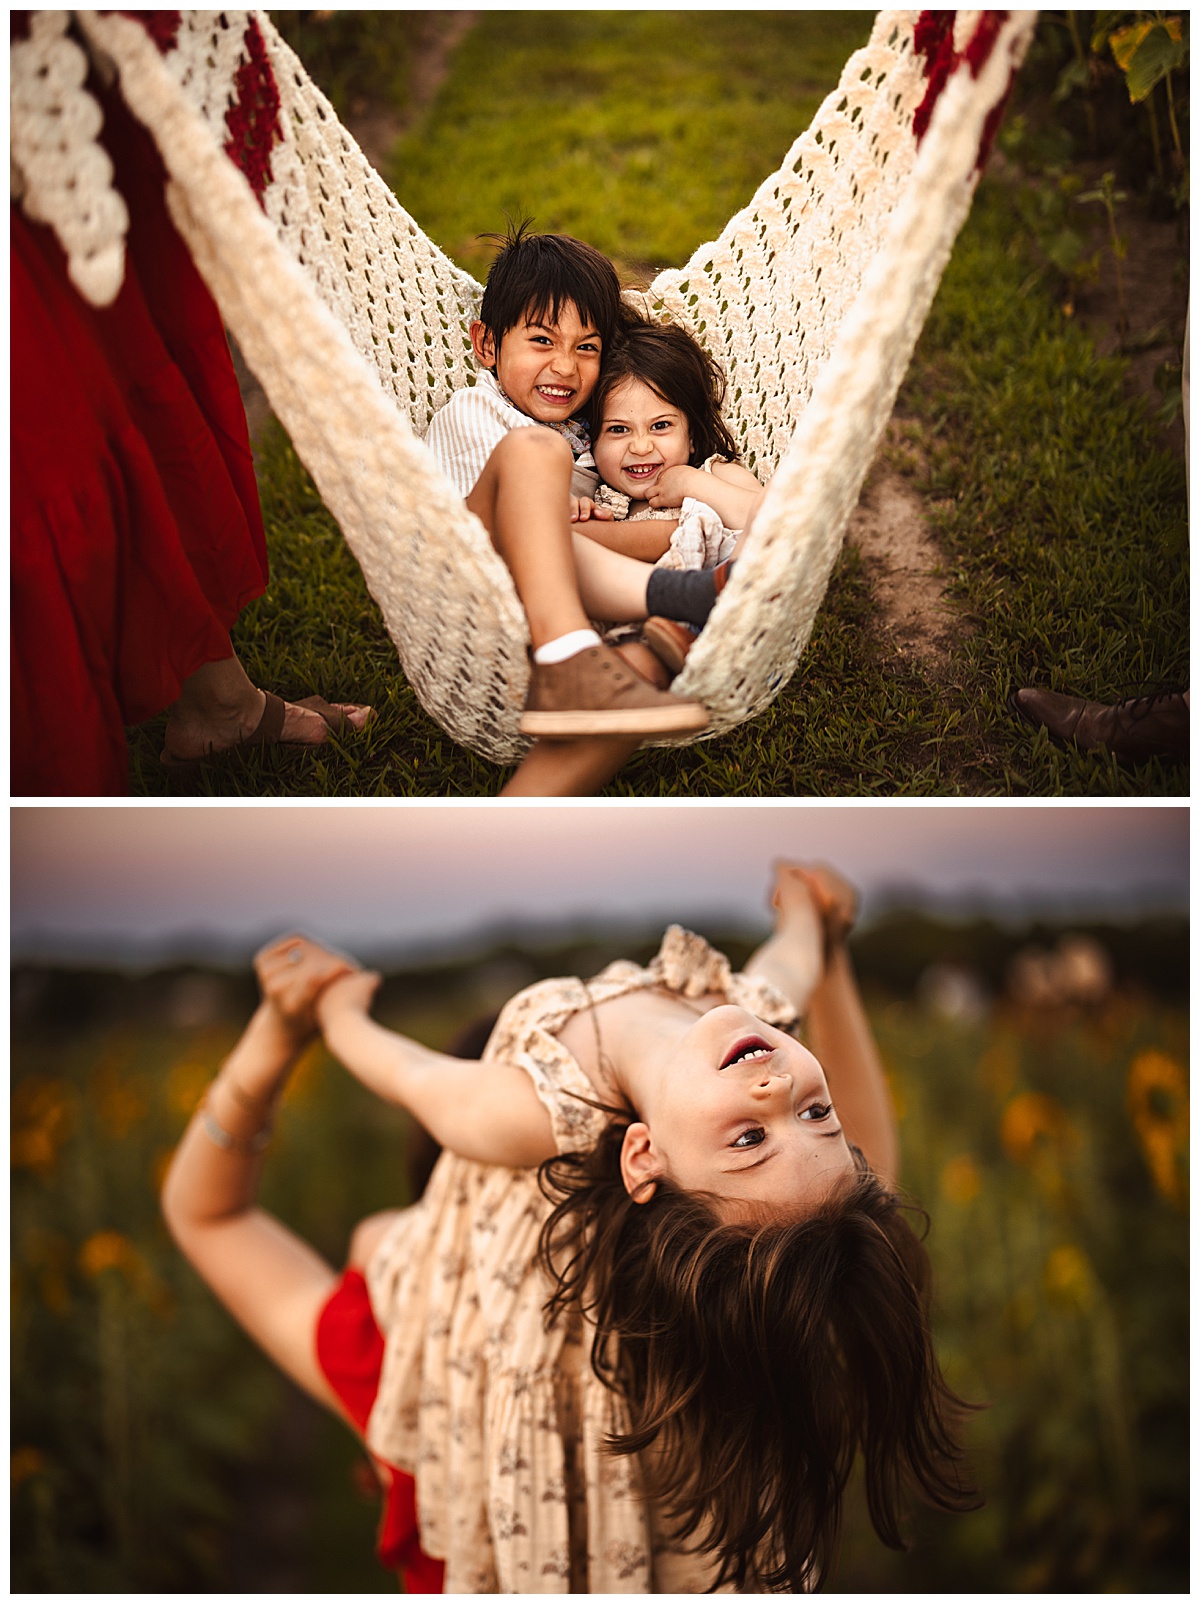 Kids play on a blanket for Sunflower Field Family Photos